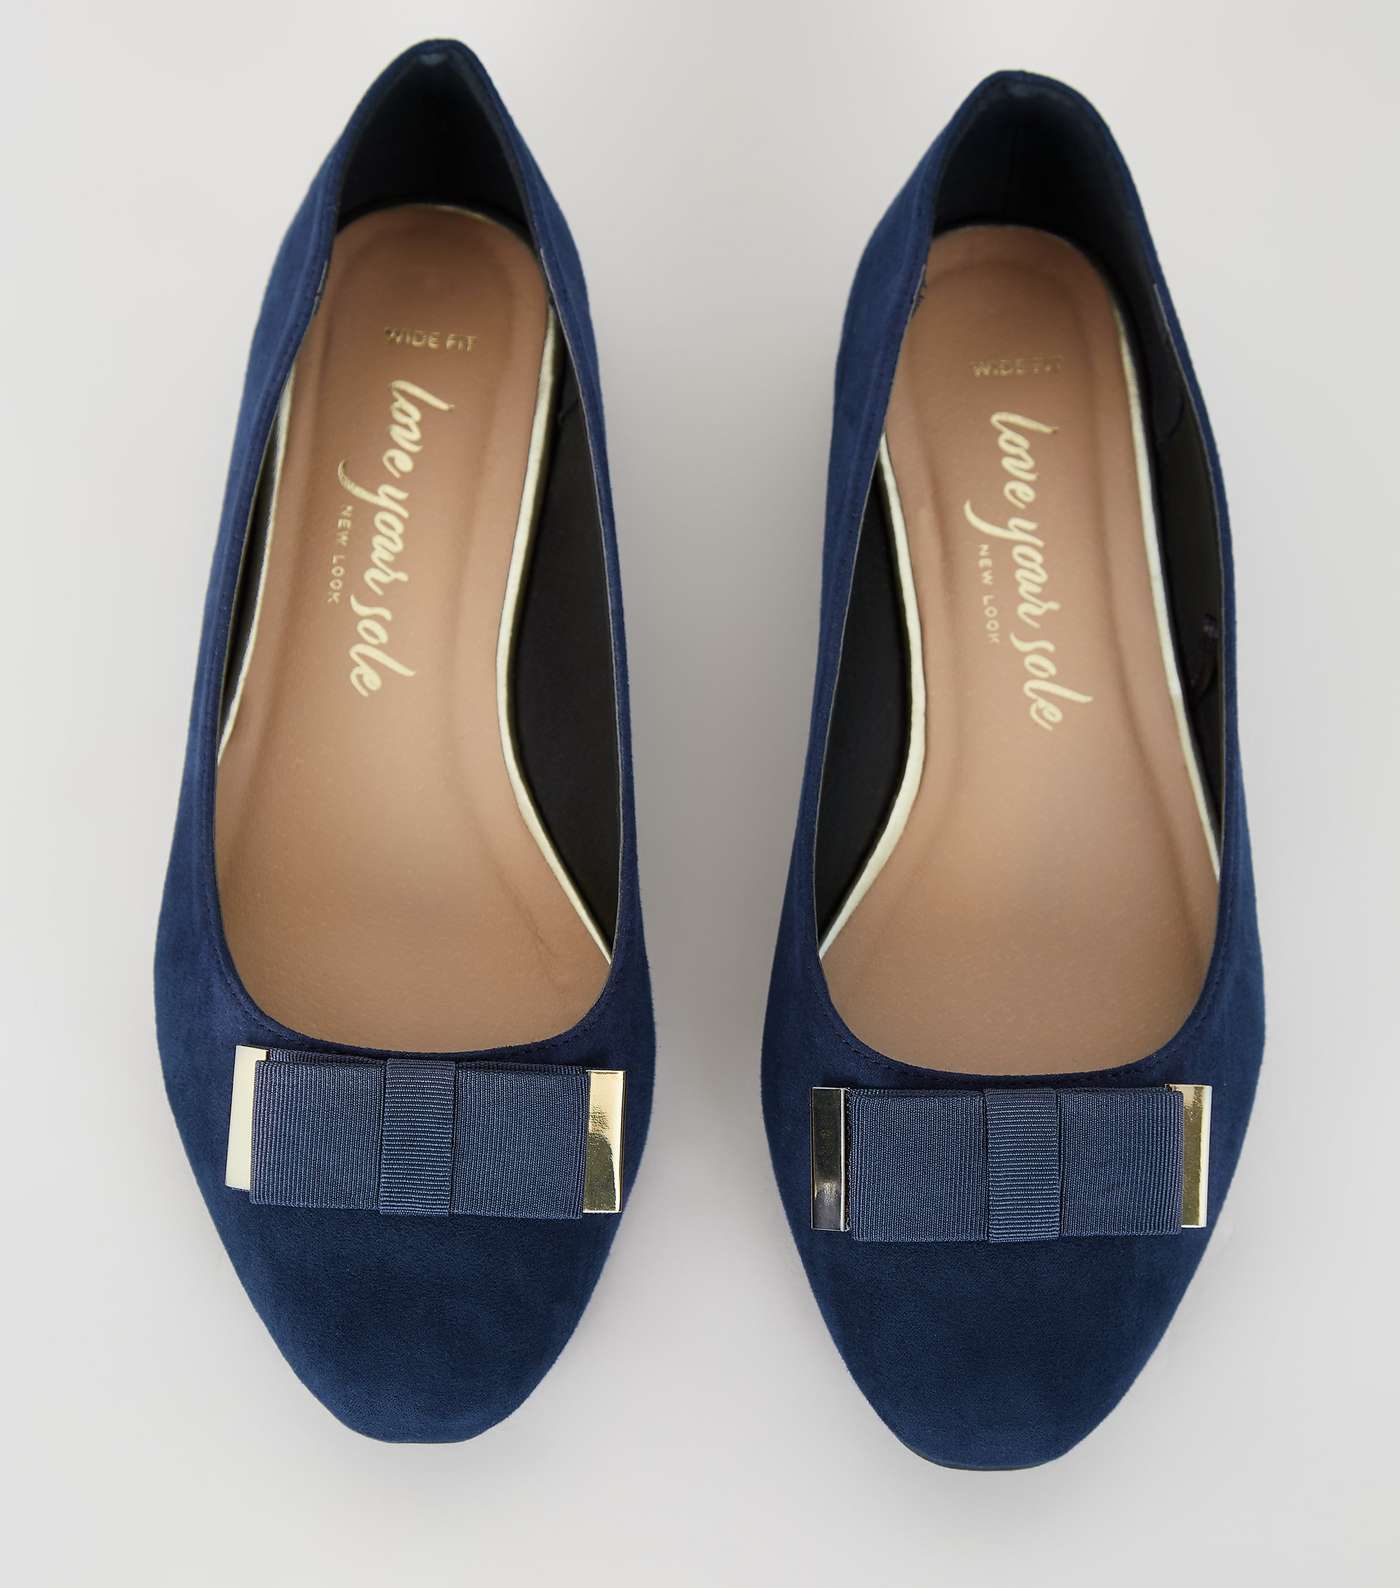 Wide Fit Navy Bow Ballet Pumps Image 3